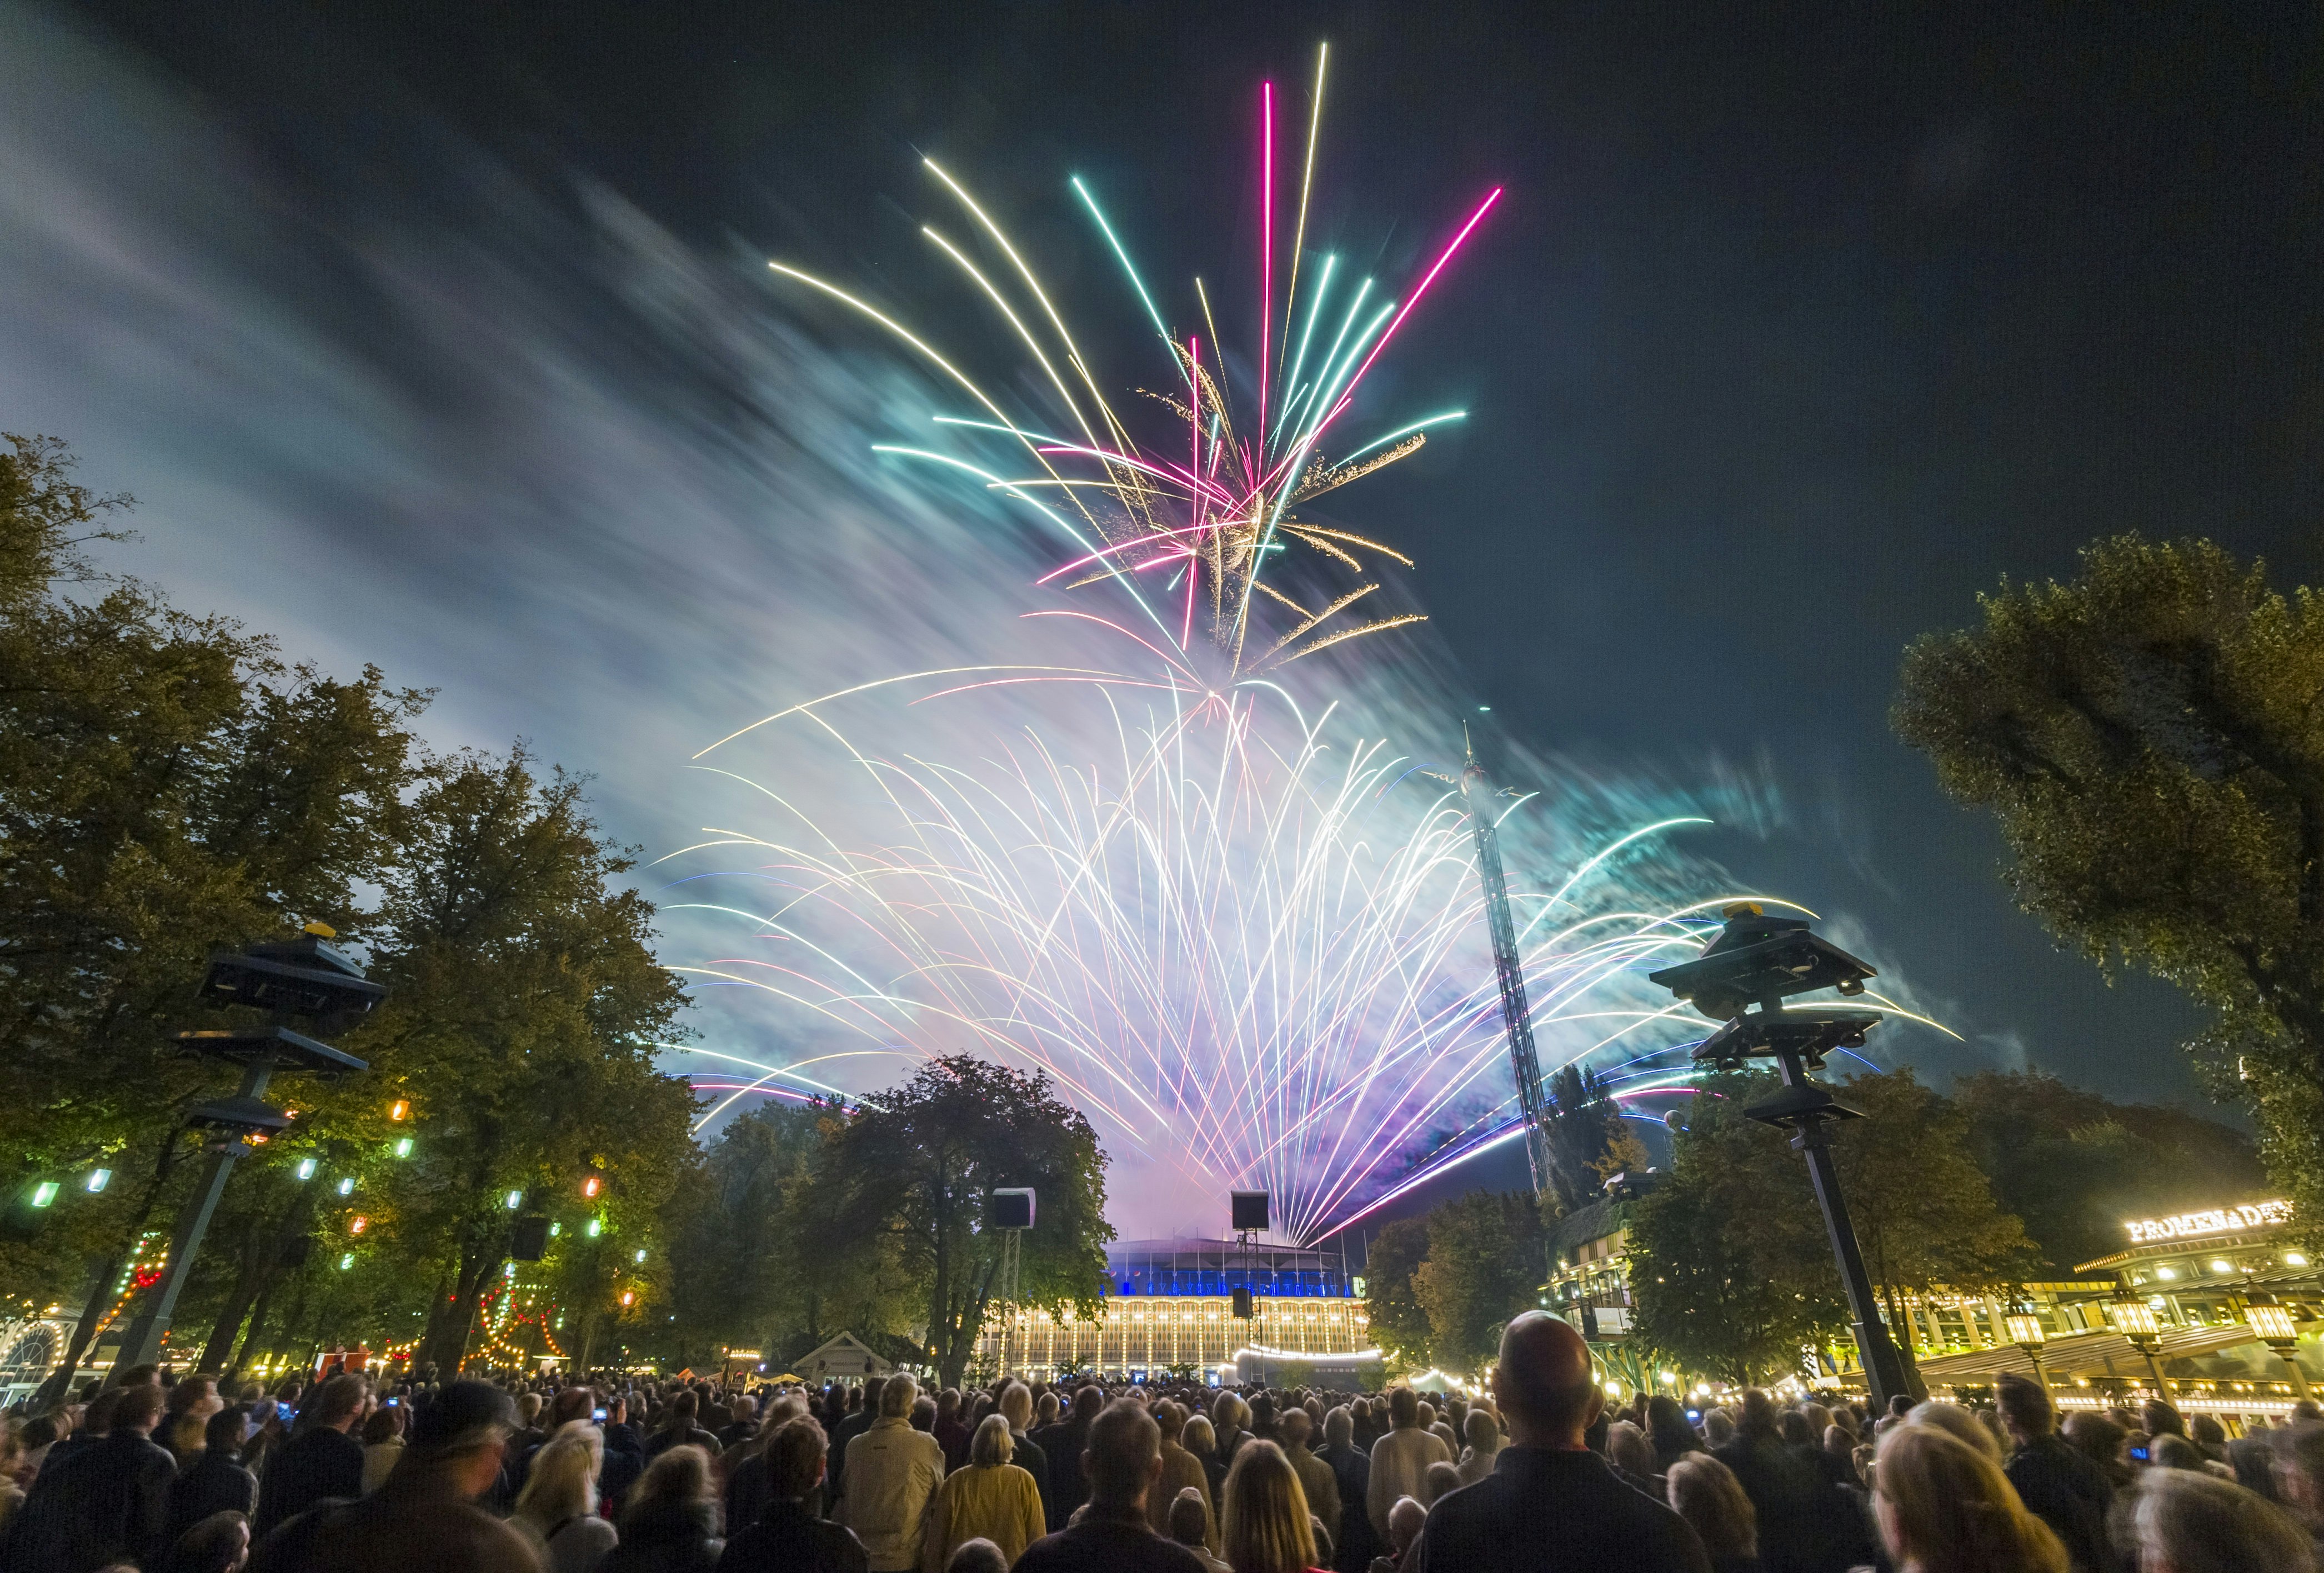 A large crowd of people are gathered at Tivoli in Copenhagen to watch a fireworks display; a brightly coloured firework has exploded in the sky.